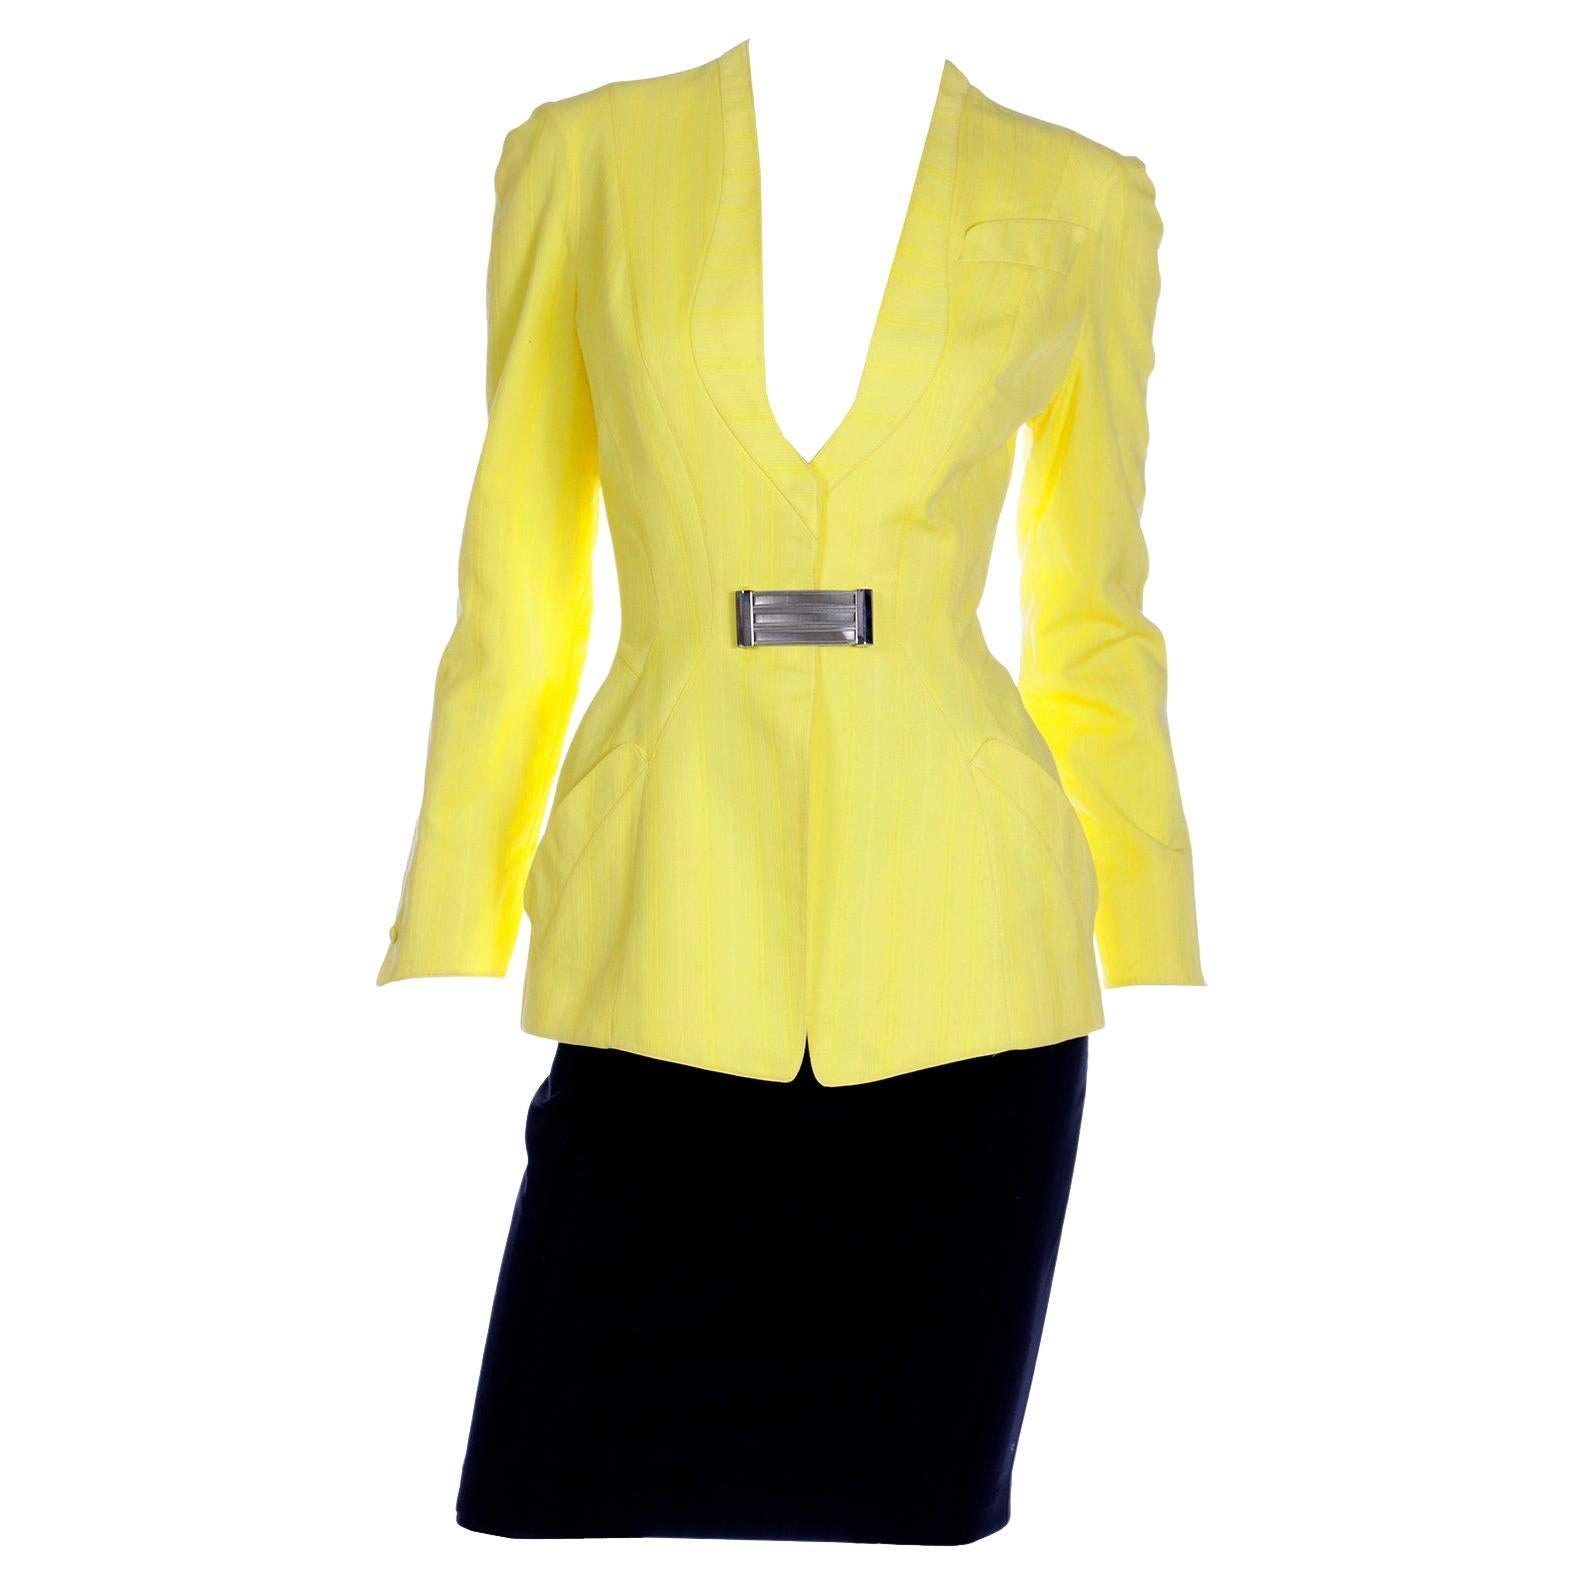 Vintage Thierry Mugler Tonal Striped Yellow Jacket and Black Pencil Skirt Suit For Sale